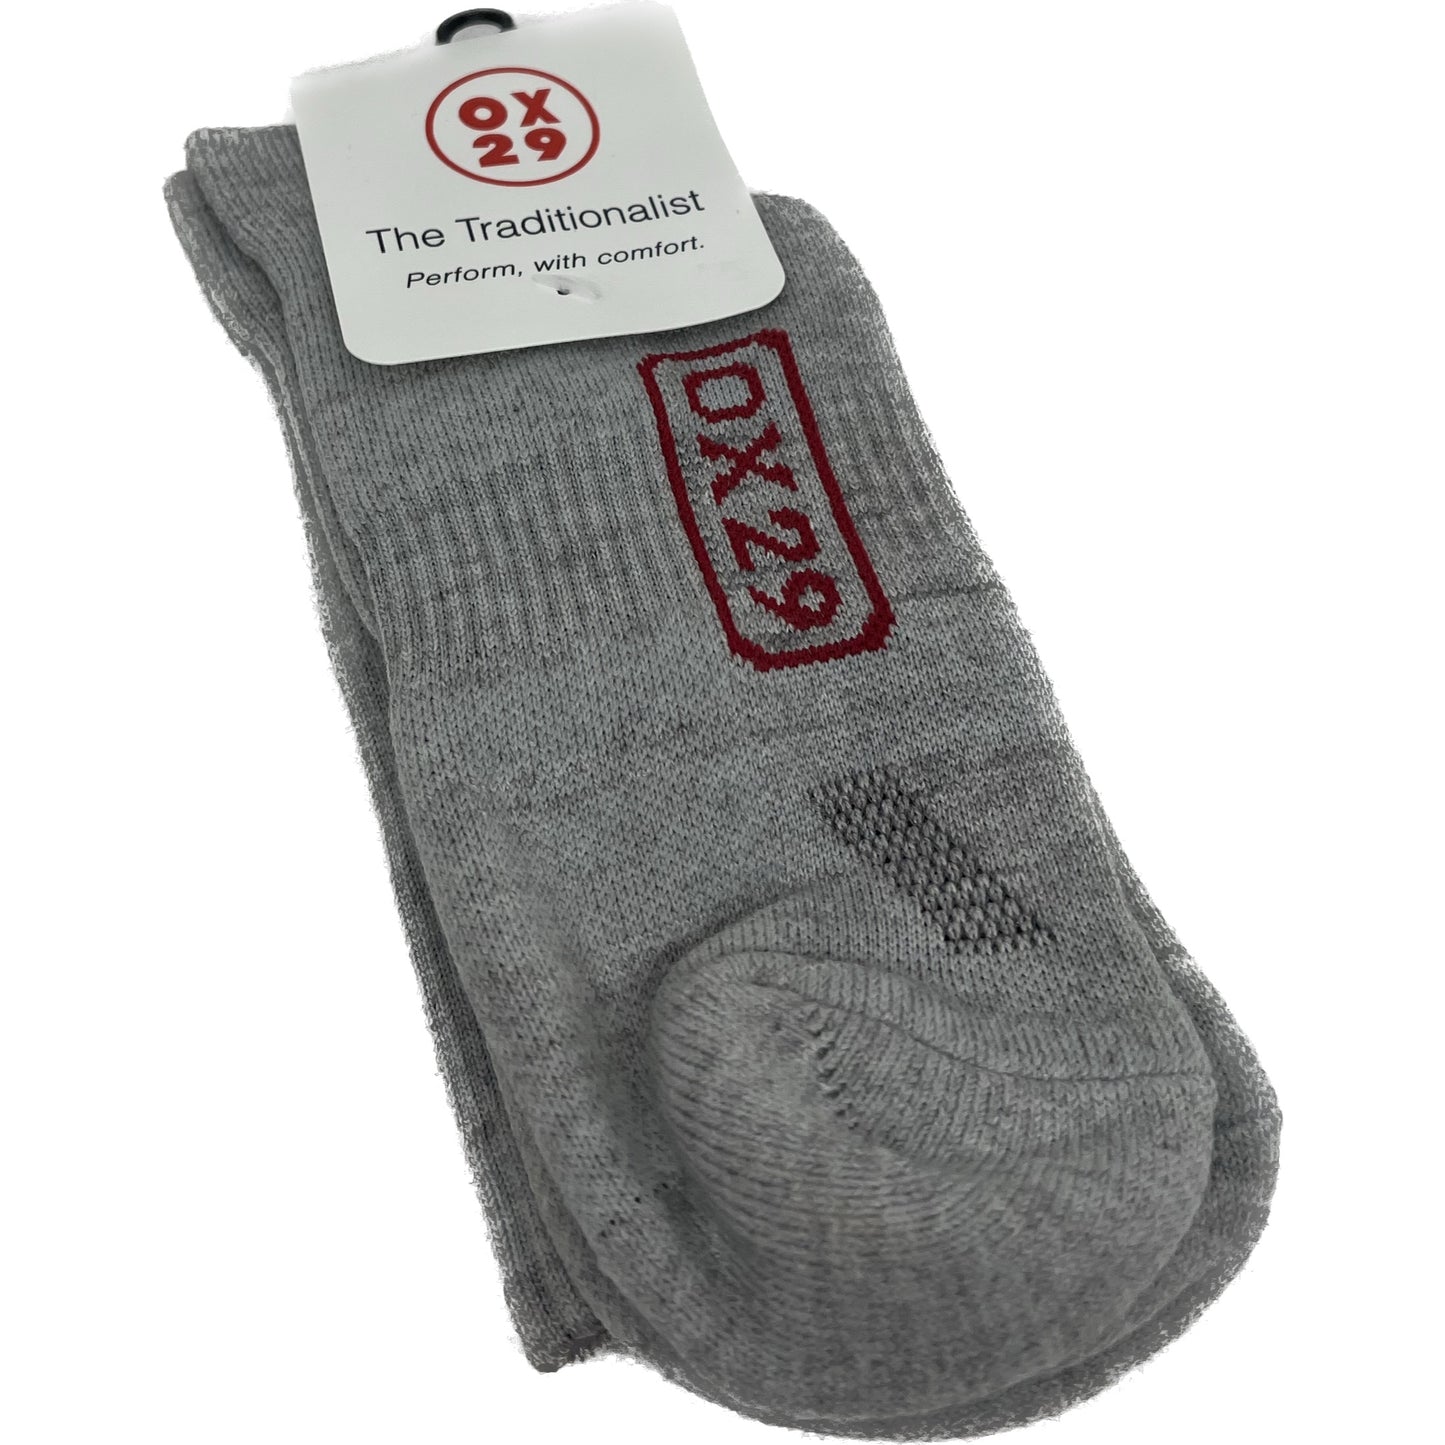 'The Traditionalist' Cricket Socks by OX29 Bat Doctor